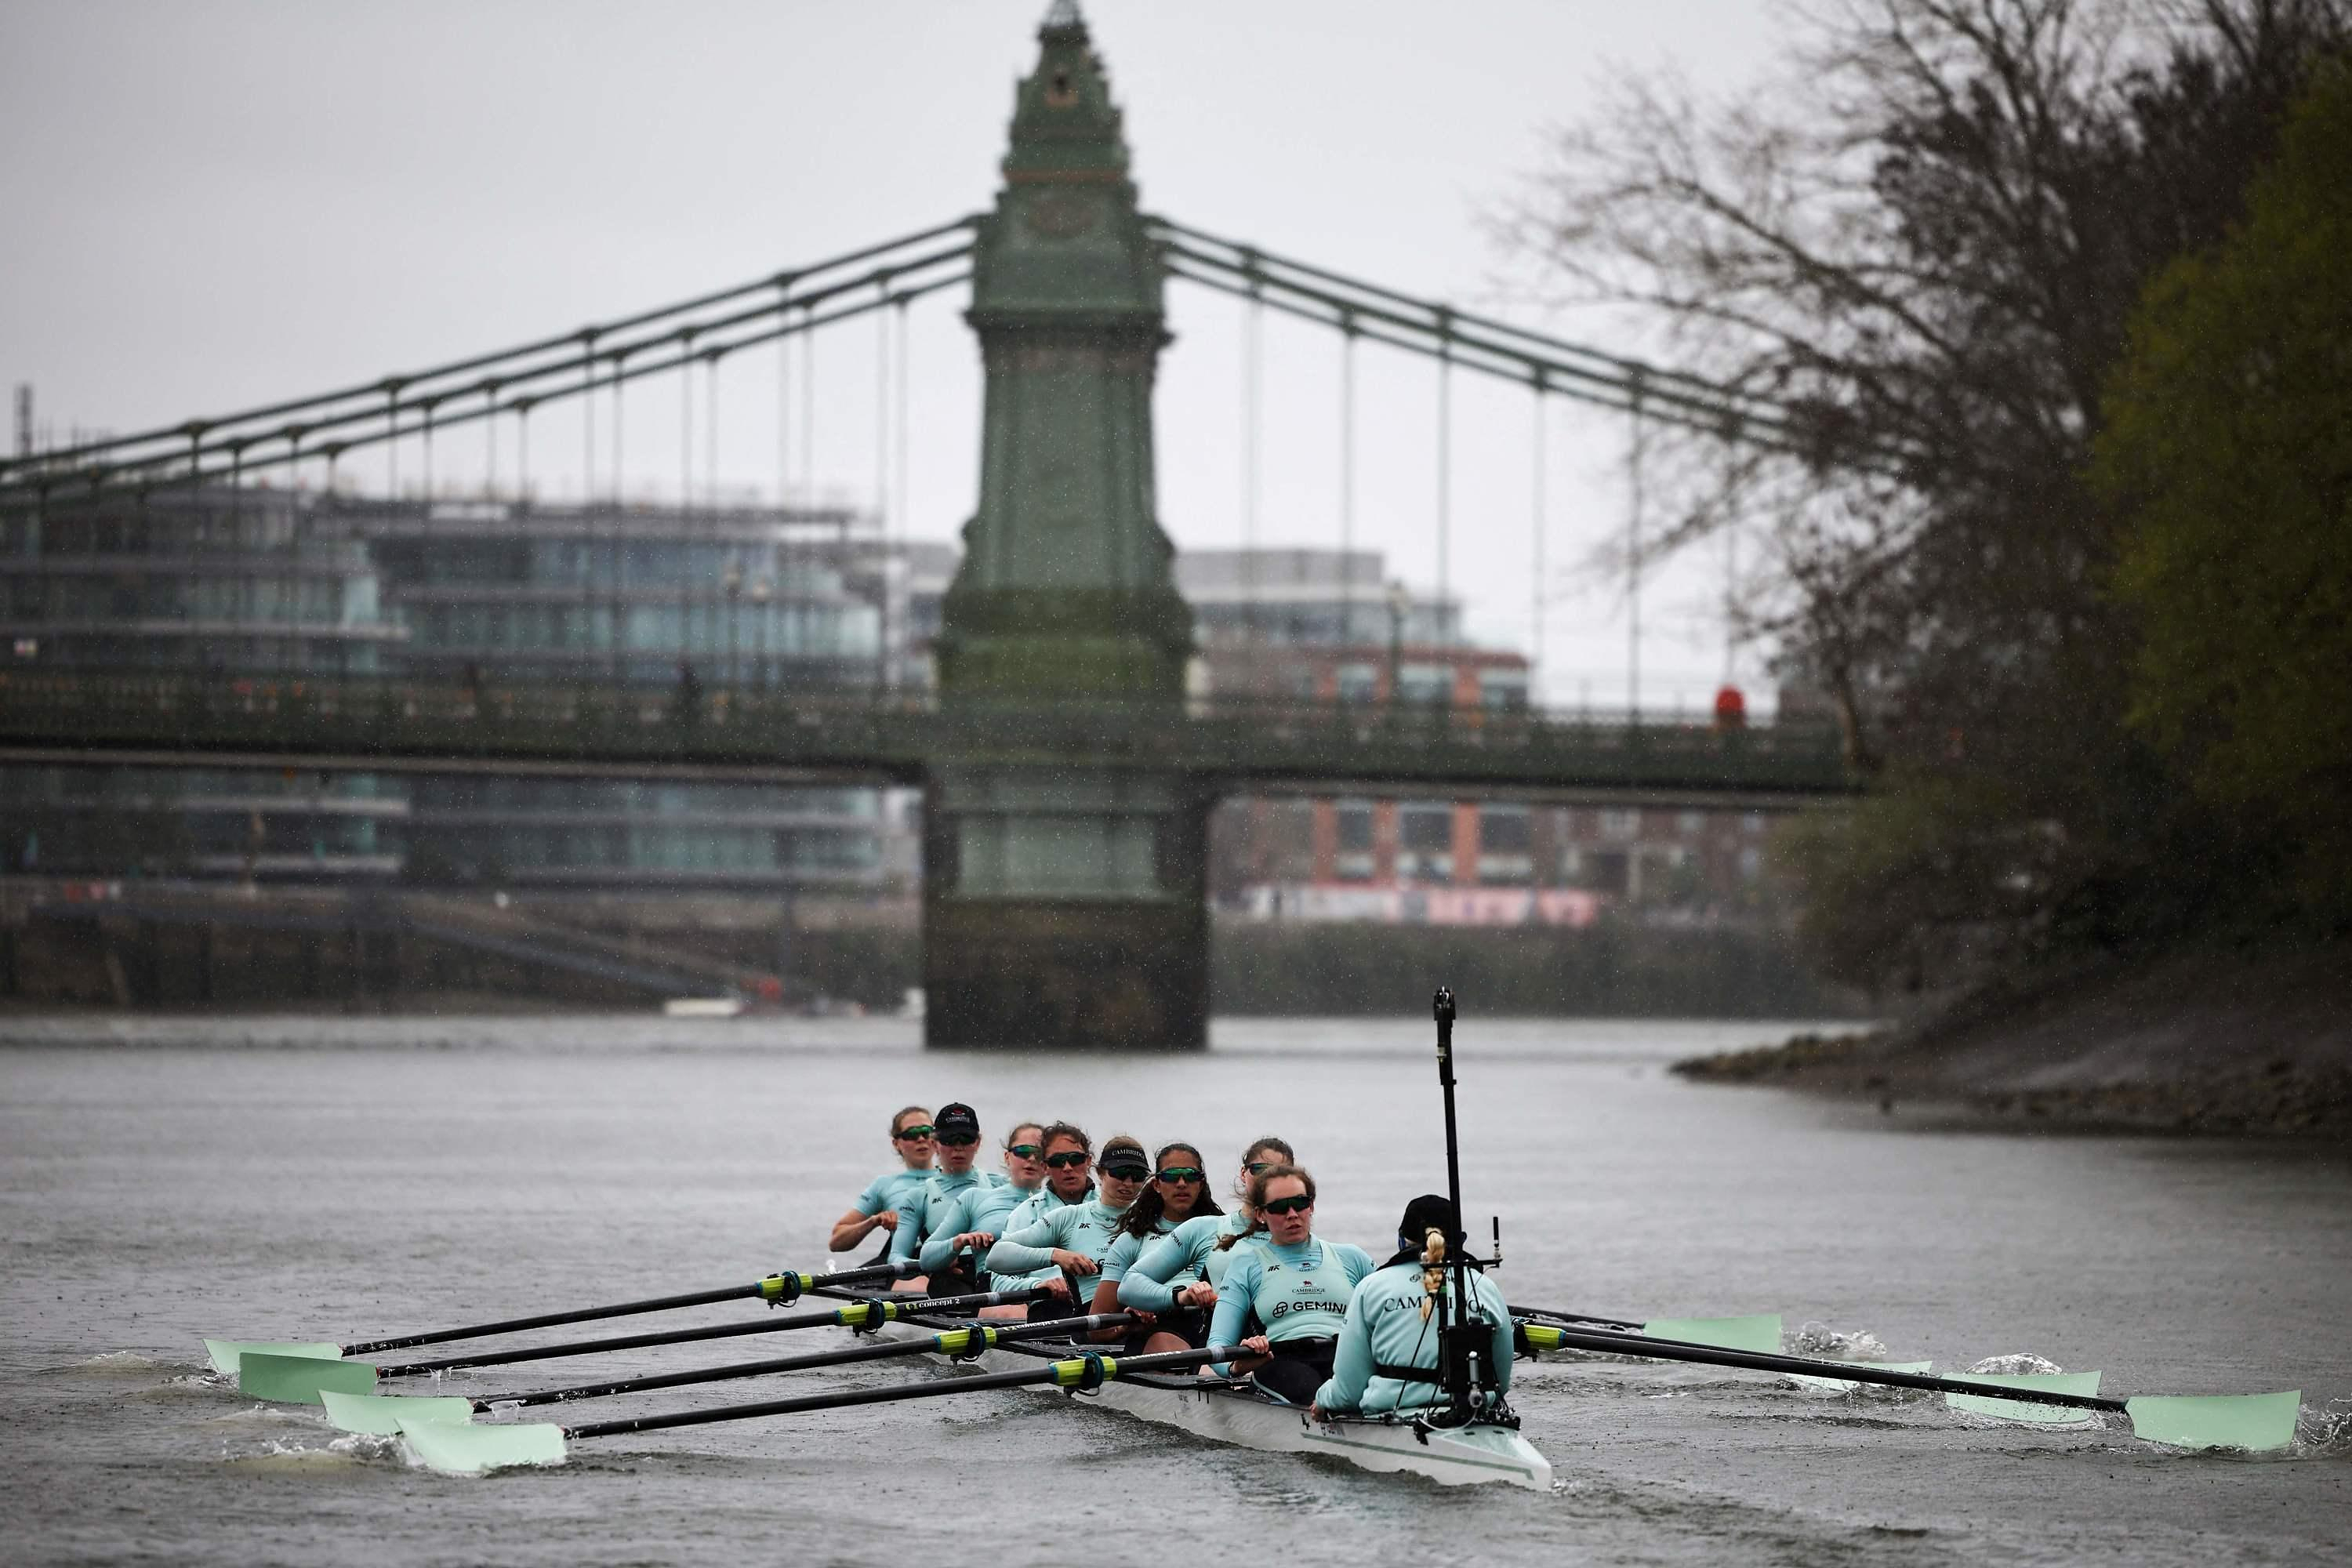 Rowing: pollution of the Thames threatens the famous Boat Race